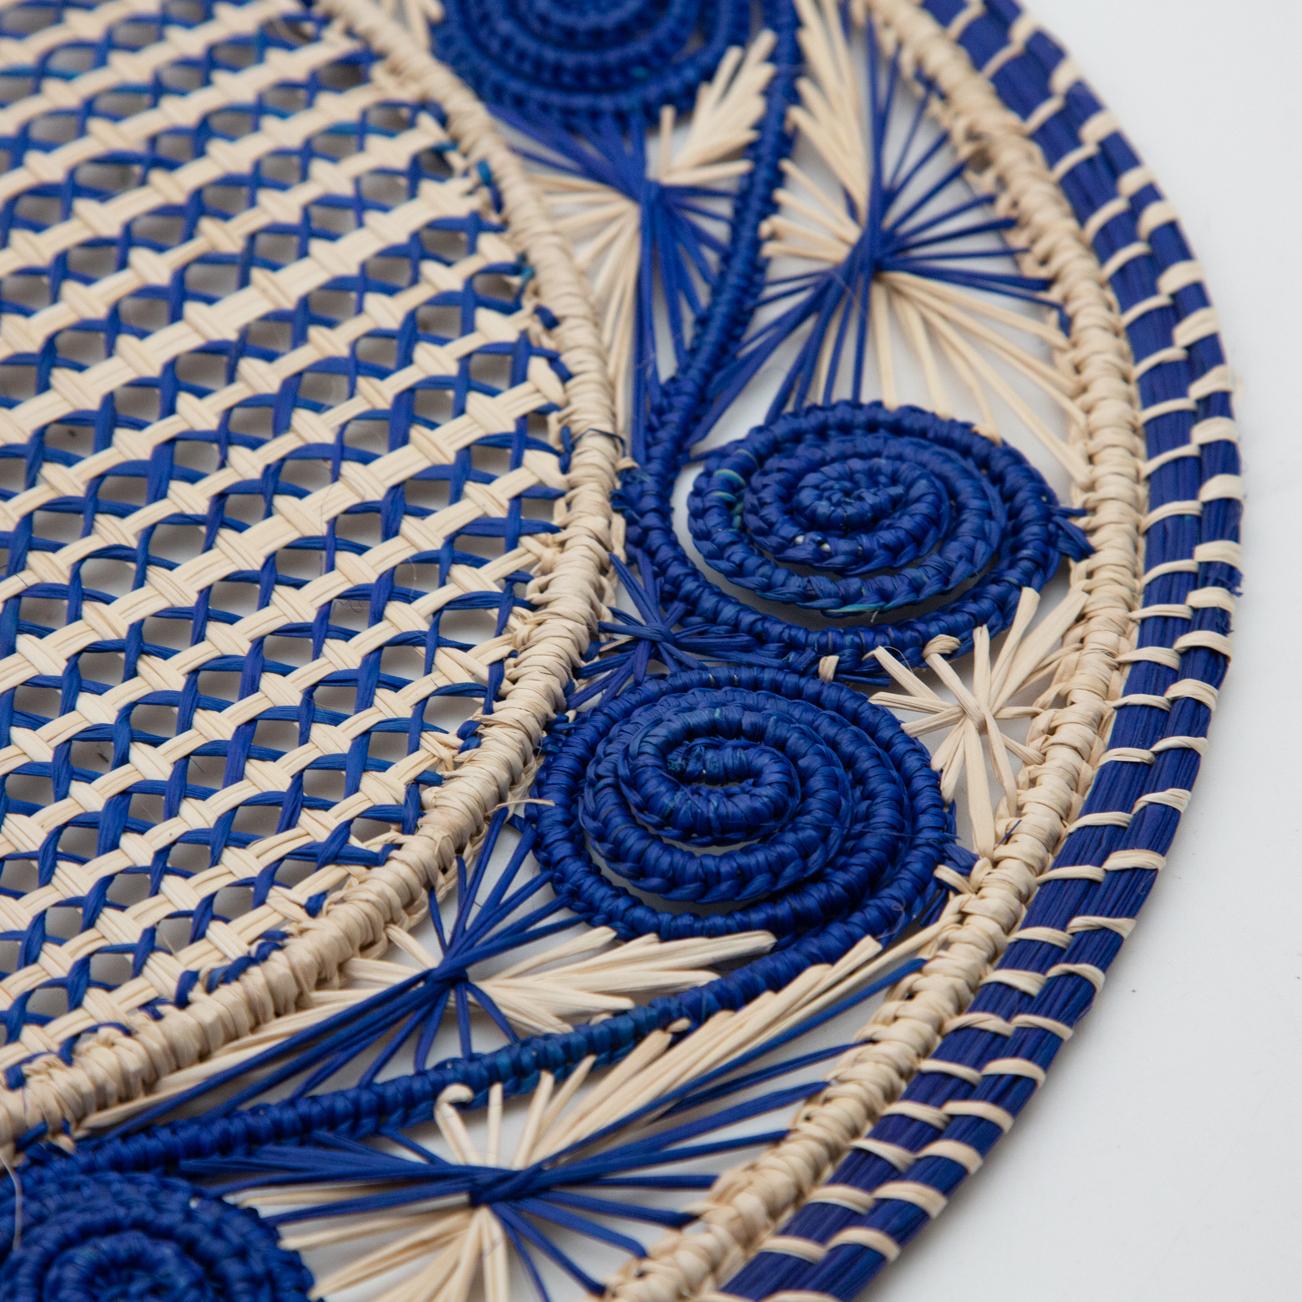 Hand-Woven Set of 8 Blue and Cream Round Iraca Fibre Placemats